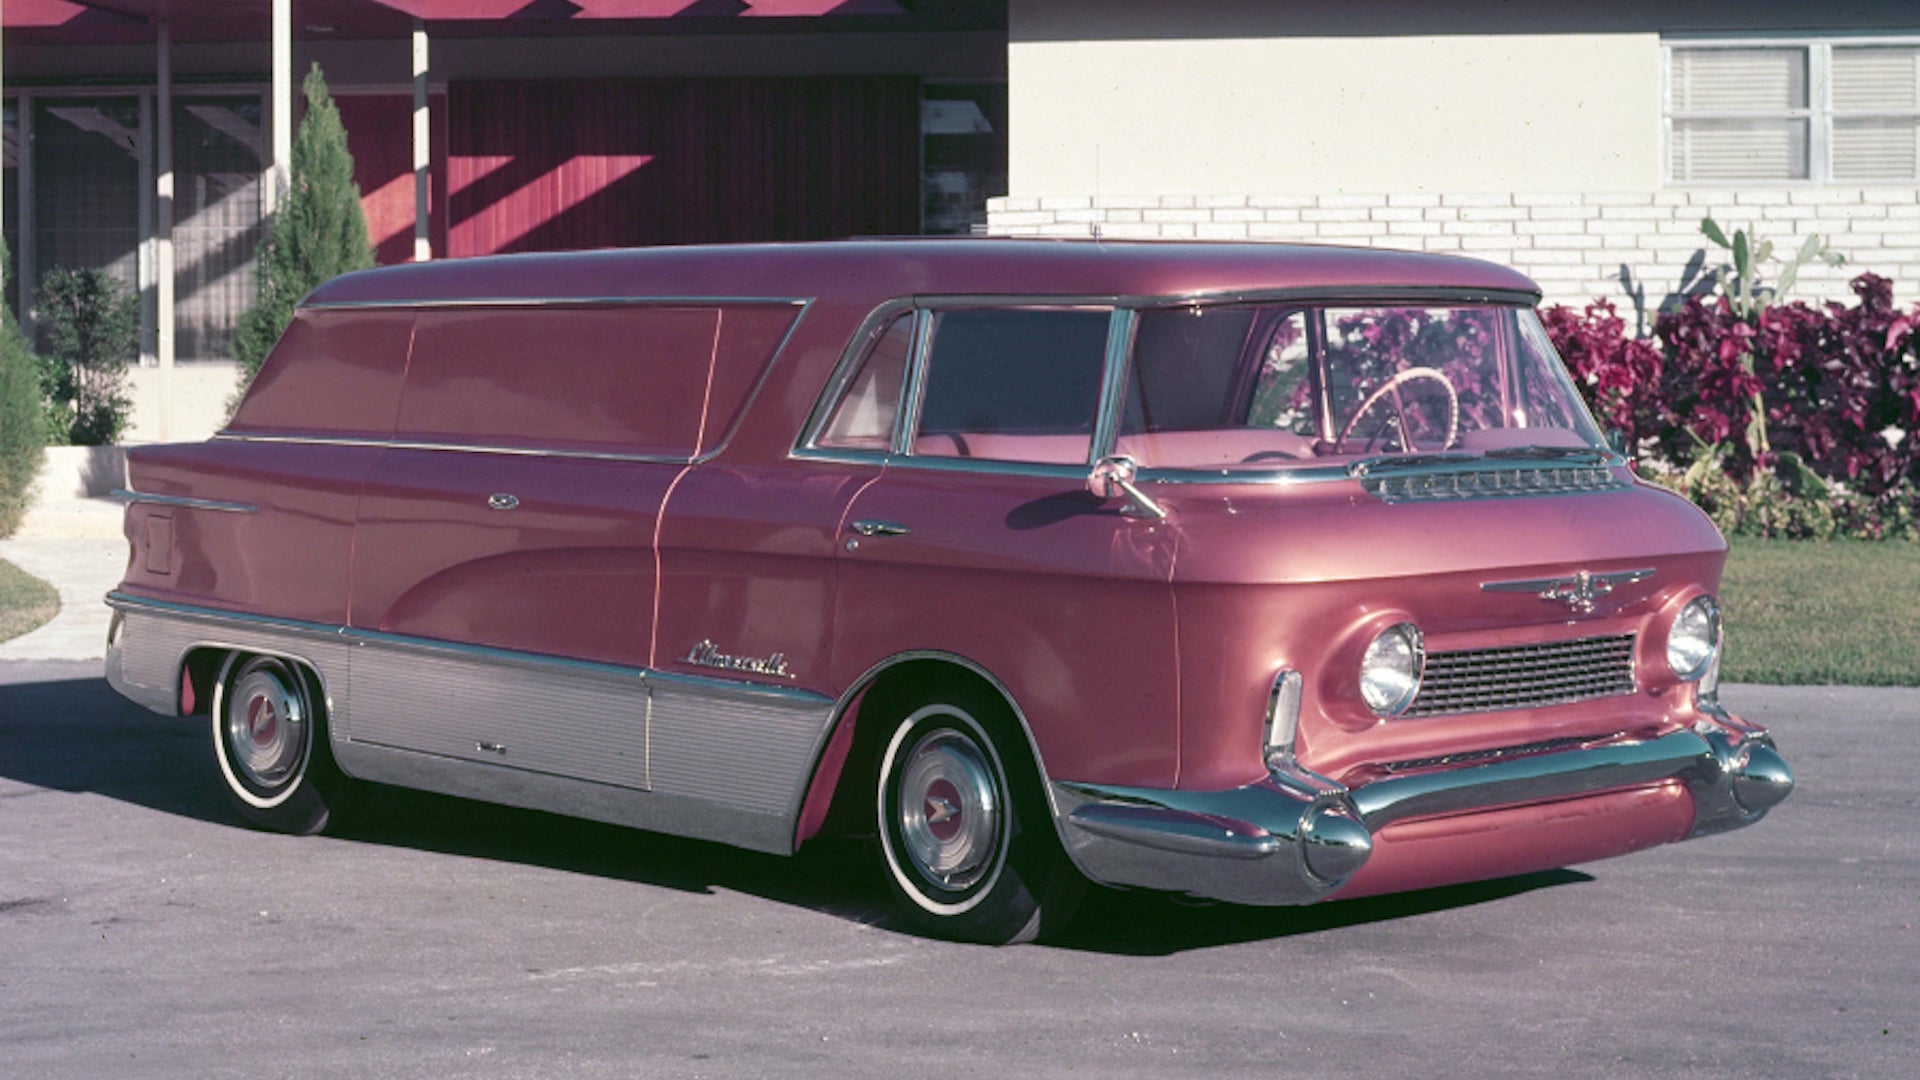 responsibility Business description artery The 1955 GMC L'Universelle Was a Front-Wheel-Drive V8 Van Ahead of Its Time